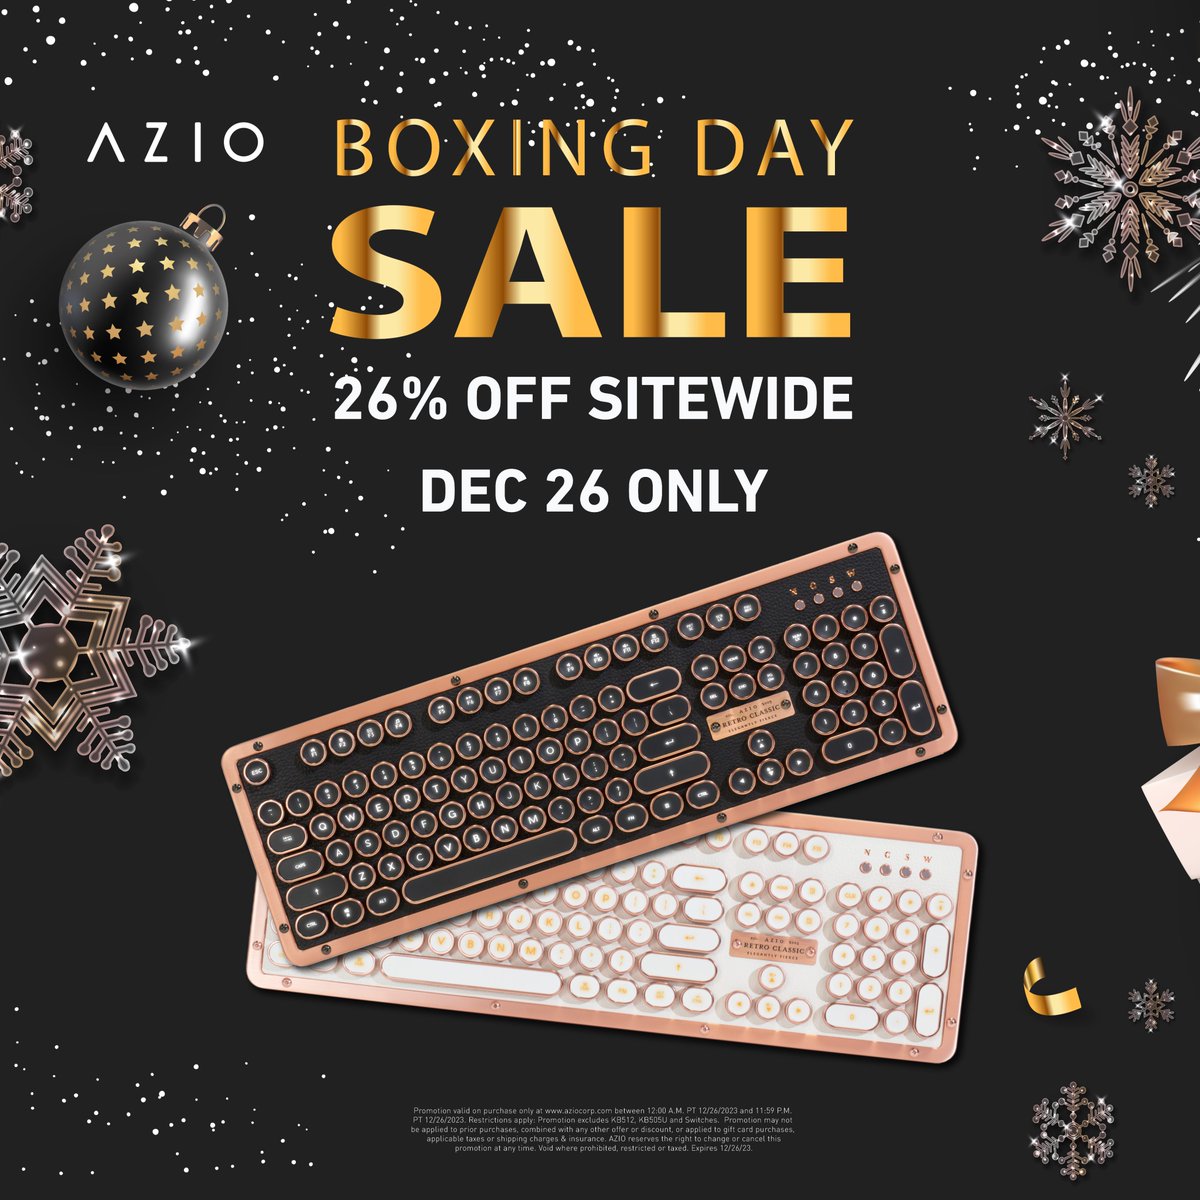 It's Boxing Day! For one day only, get 26% OFF sitewide! #azio #keyboard #mouse #mice #desksetup #tech #premium #luxury #lifestyle #design #gift #shop #sale #promo #promotion #discount #boxingday #canada #sitewide #shopping #oneday #gaming #gamer #wireless #rgb #wfh #office